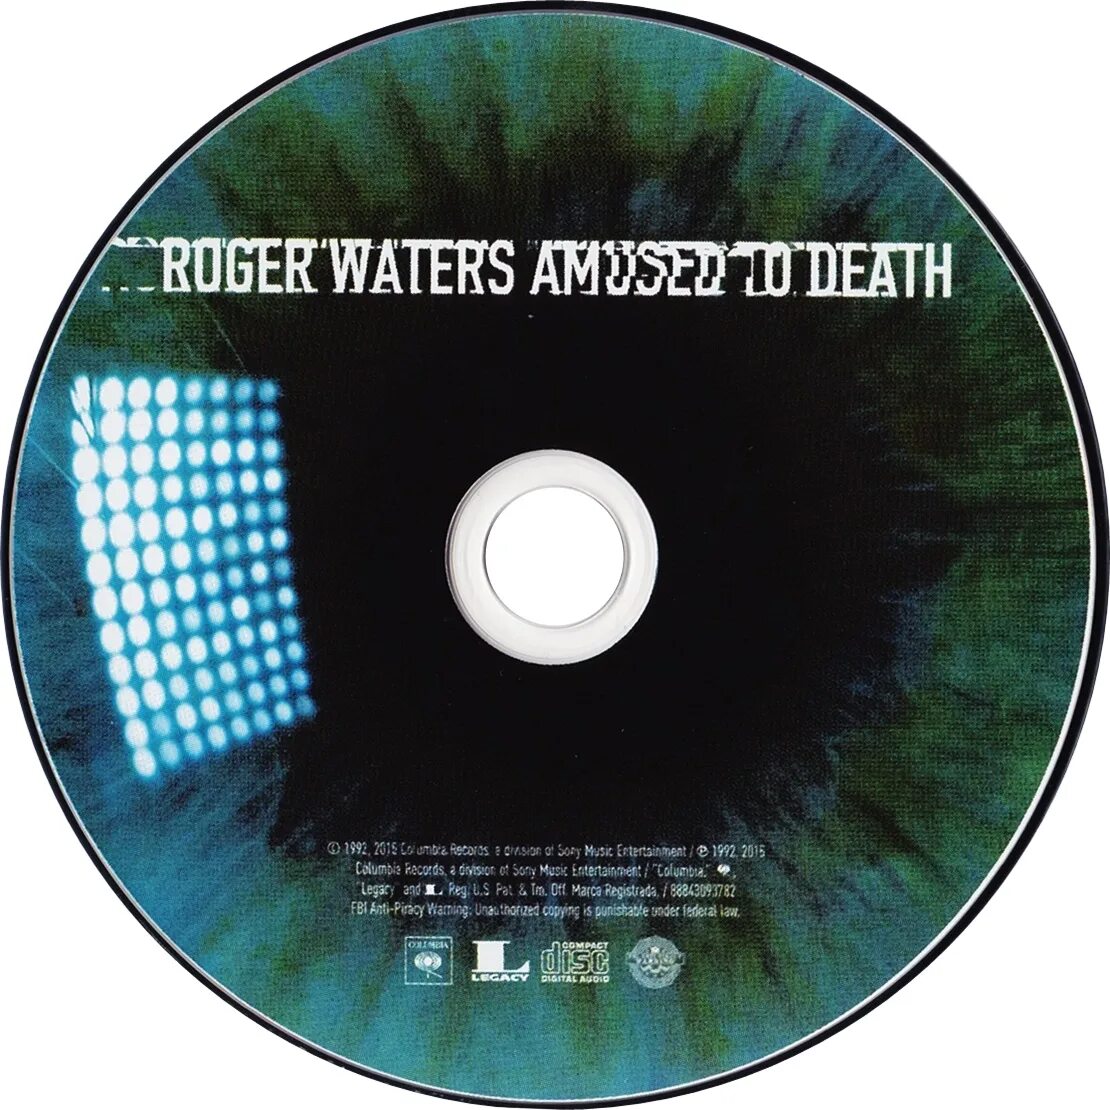 Amused to death. Amused to Death 1992. Роджер Уотерс 1992 amused to Death. Amused to Death Роджер Уотерс обложка. Roger Waters - amused to Death 1992 обложка альбома.